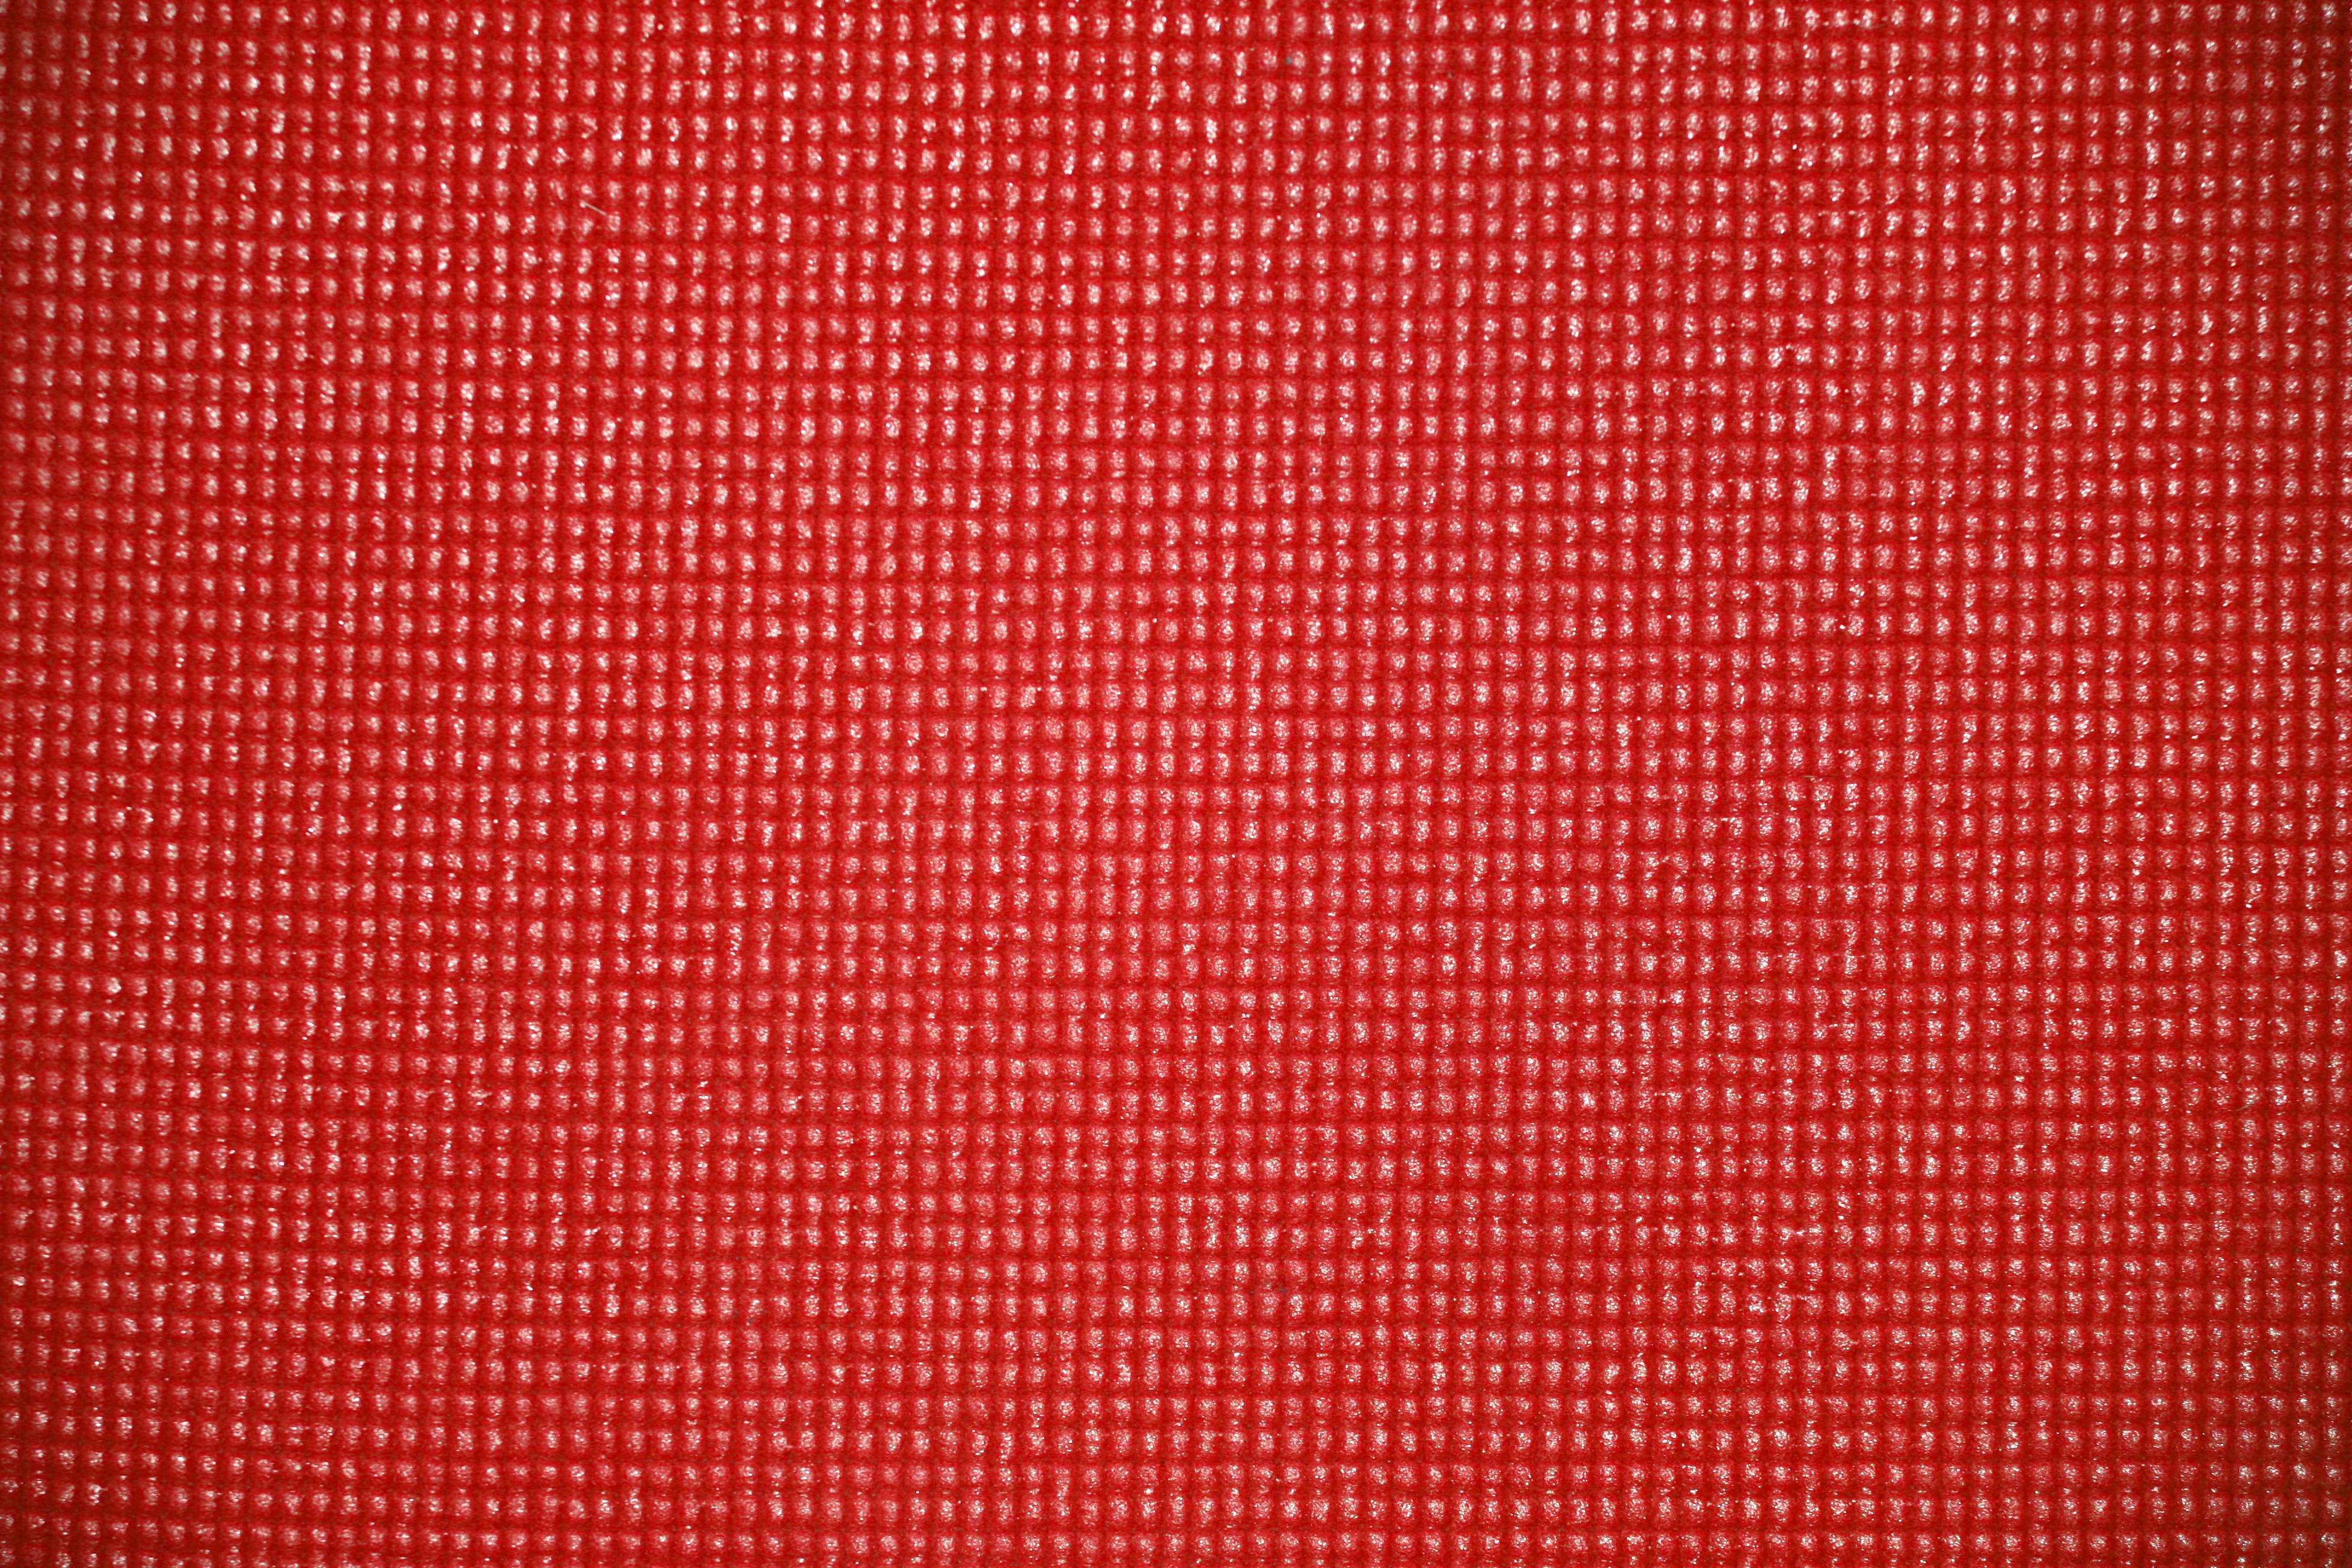 Red Yoga Exercise Mat Texture Picture, Free Photograph